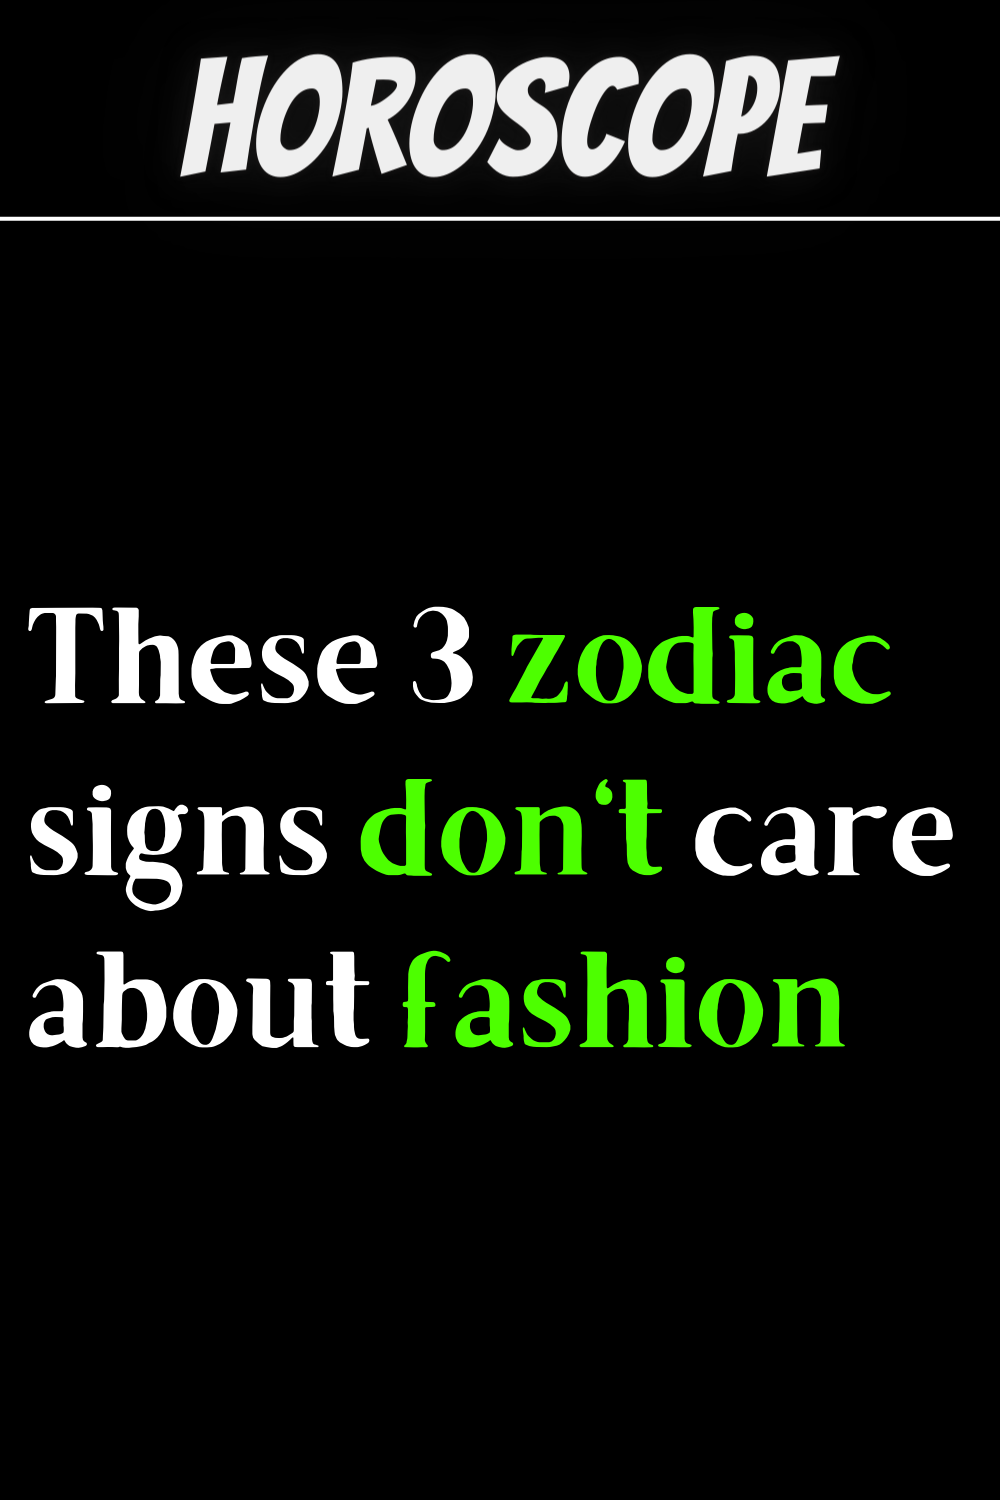 These 3 zodiac signs don't care about fashion